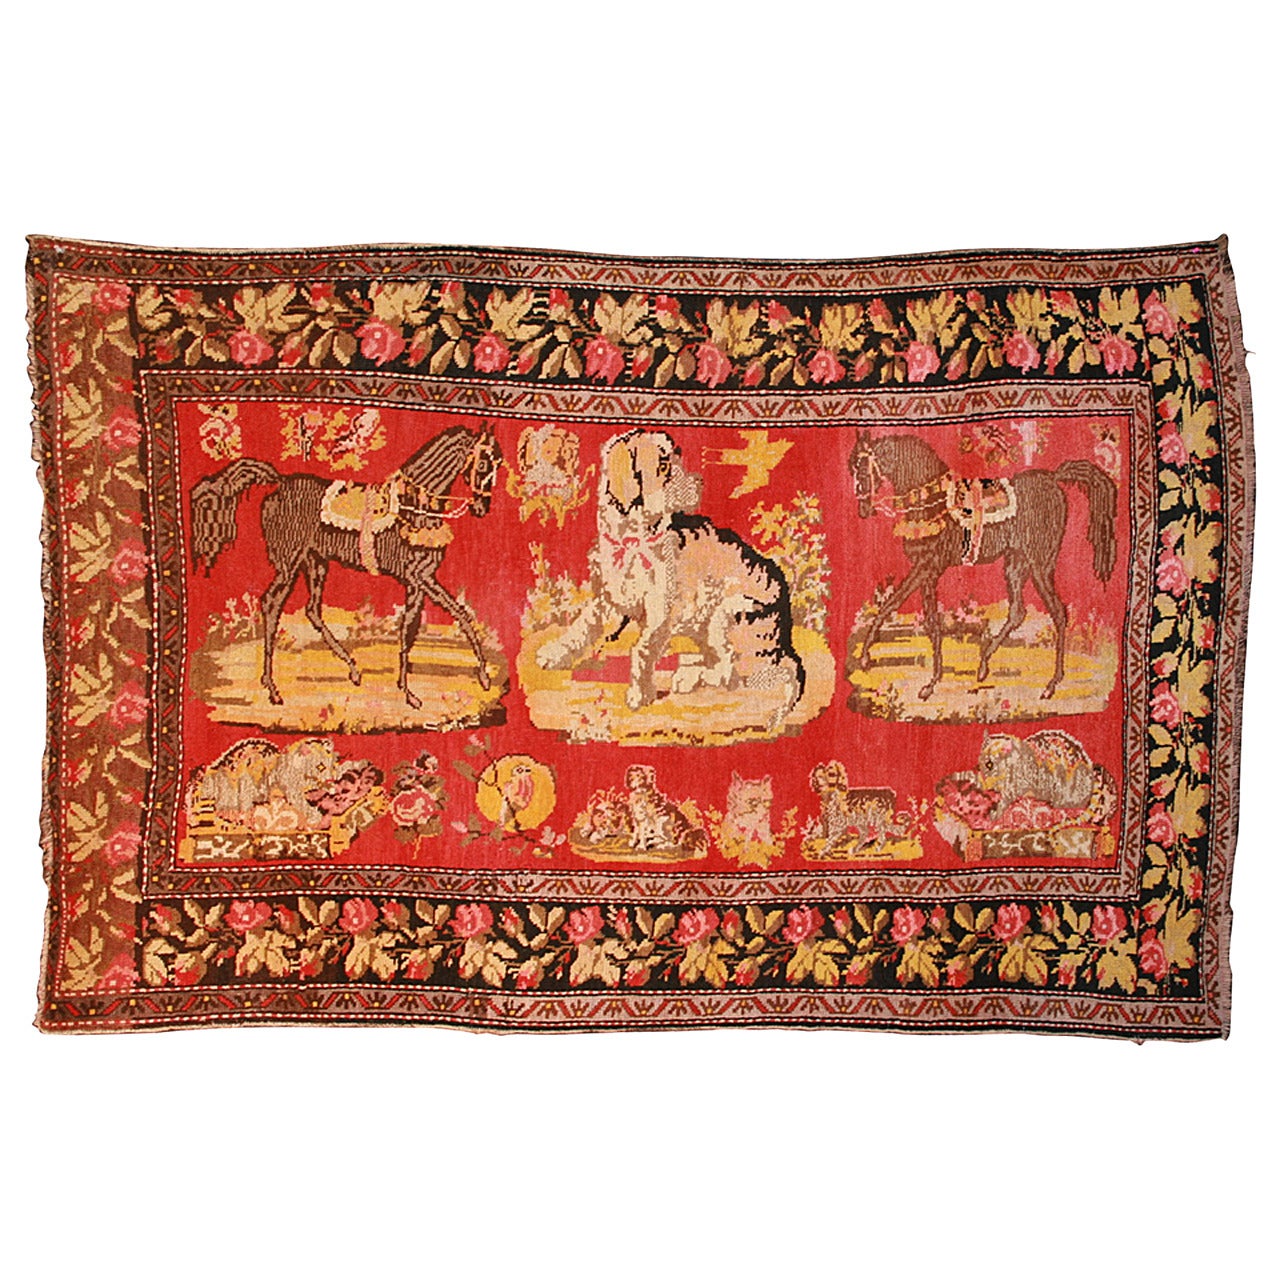 Antique Pictorial Karabagh with Horses and Dogs For Sale